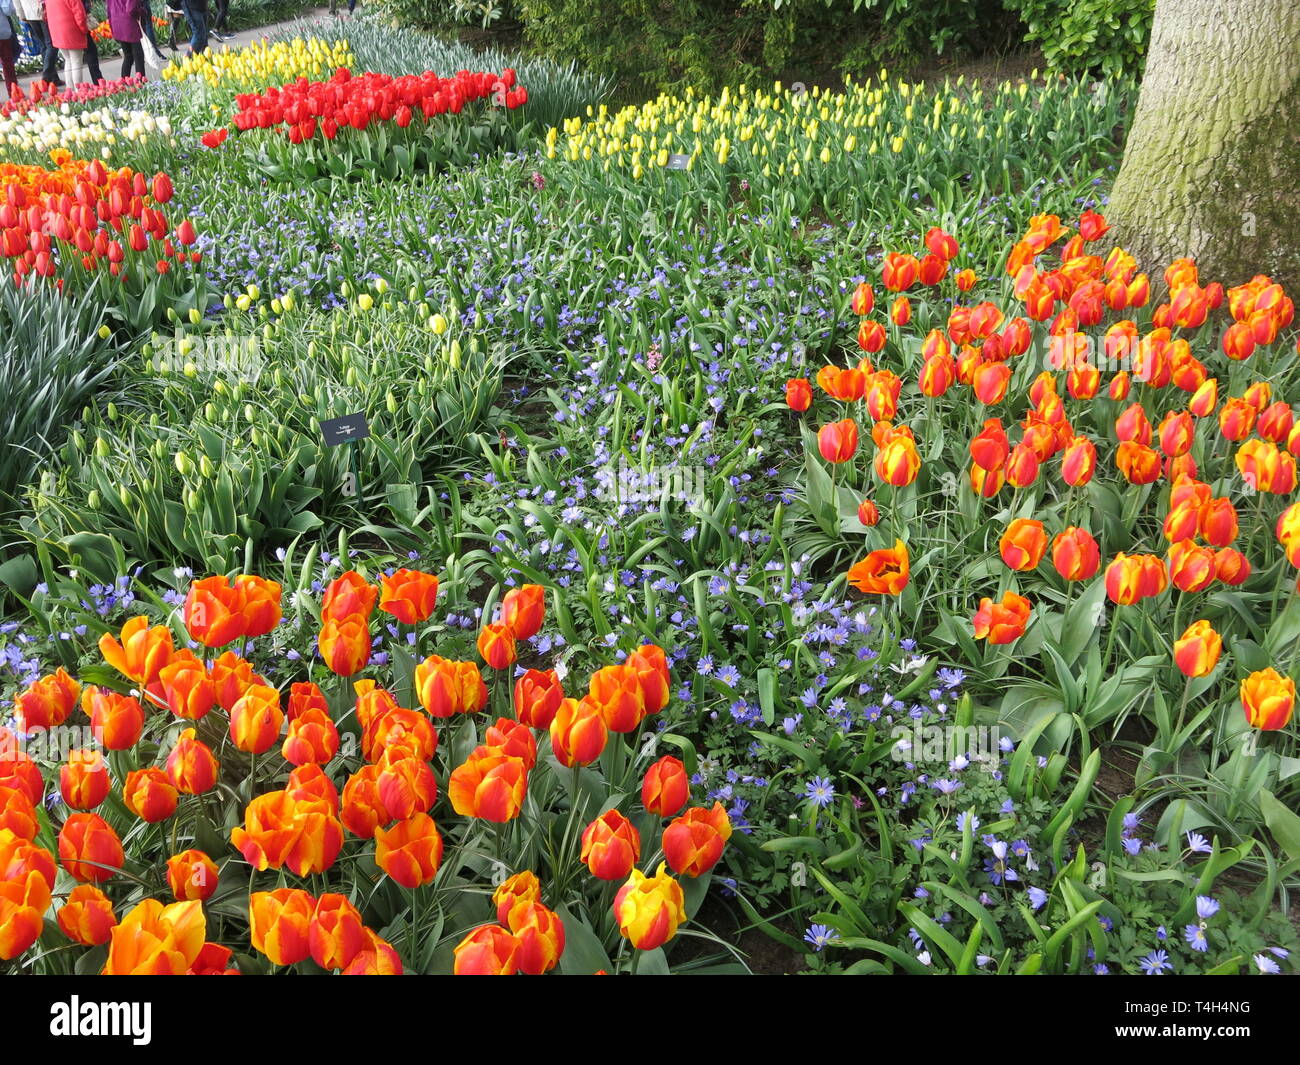 A mass of spring bulbs makes a colourful spectacle at the annual tulip  festival at Keukenhof, the Netherlands; April 2019 Stock Photo - Alamy